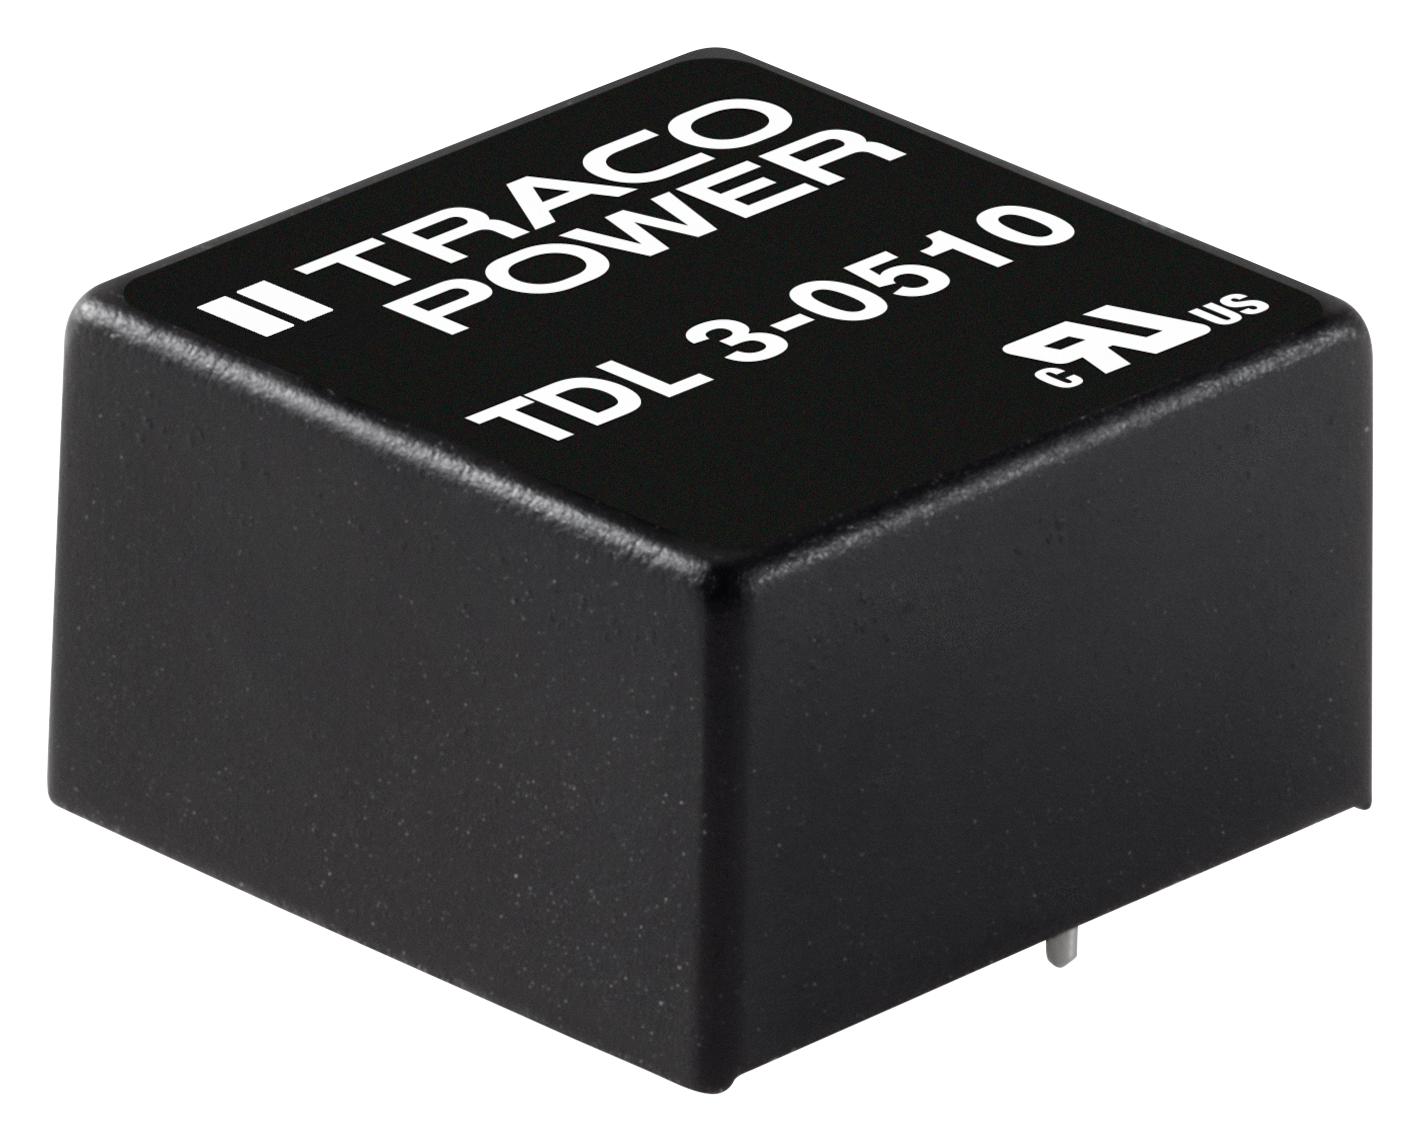 TDL 3-2421 DC-DC CONVERTER, 2 O/P, 3W TRACO POWER